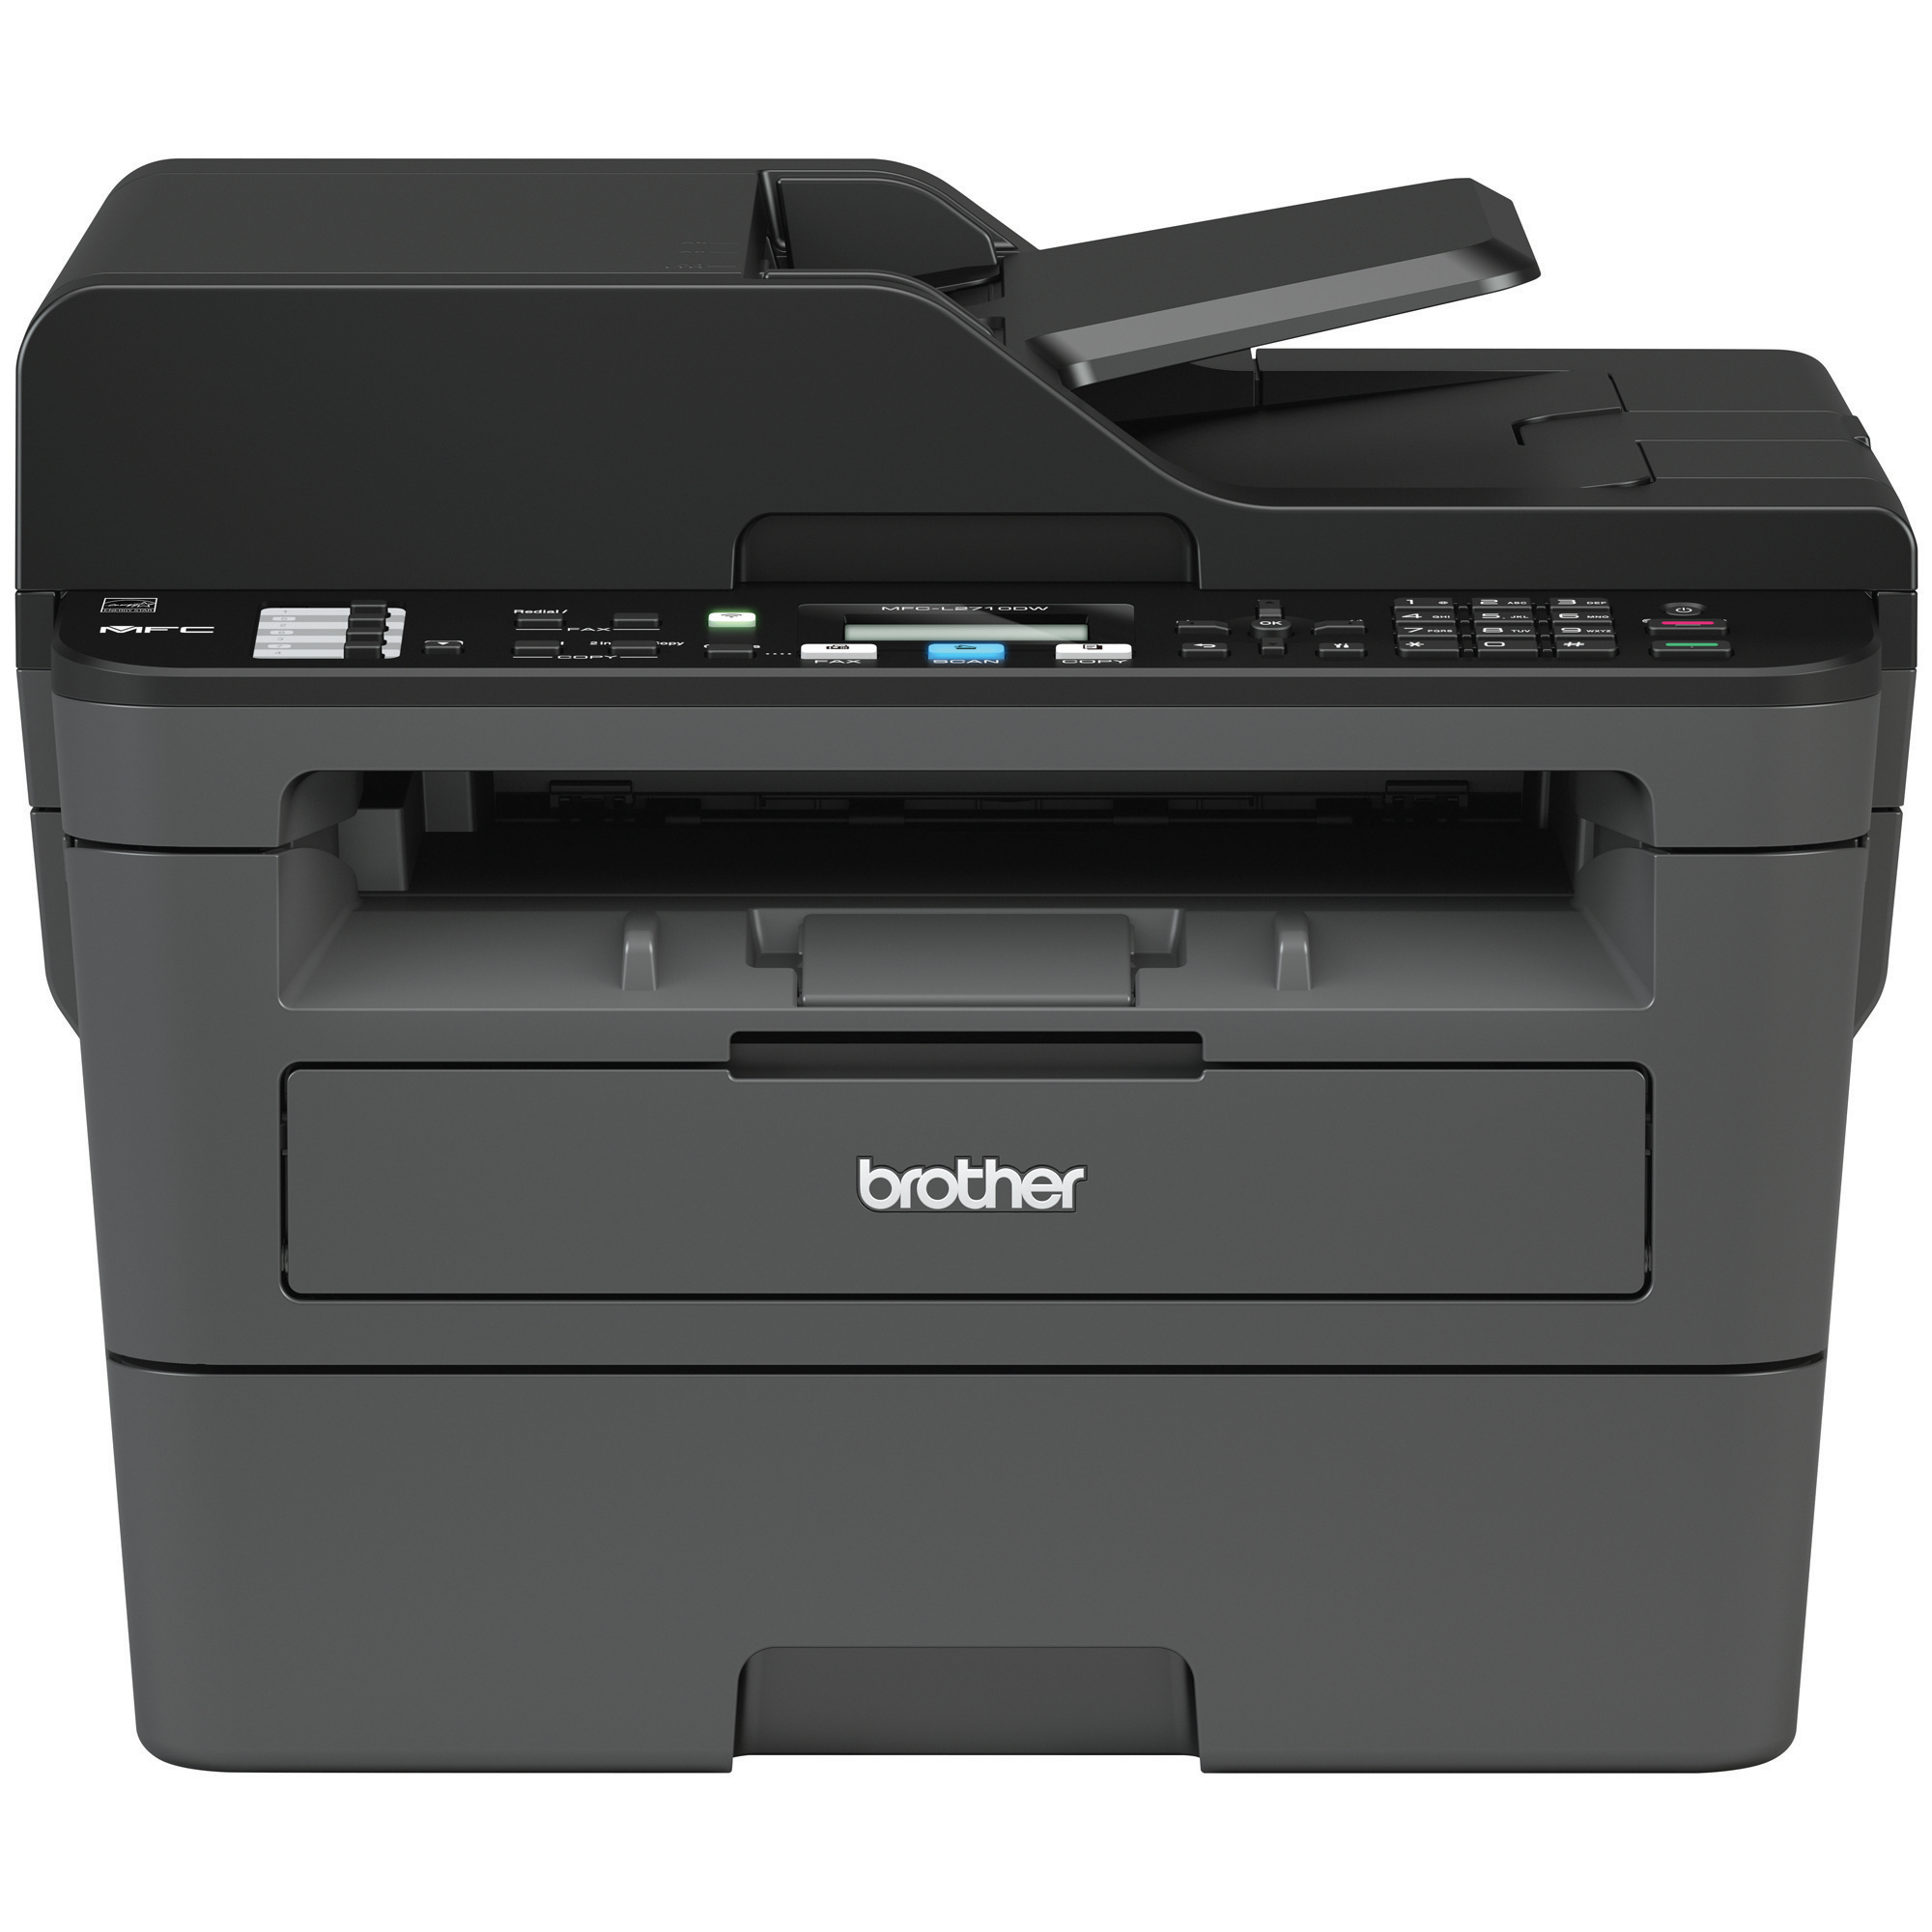 Brother MFC-L2710DW Monochrome Laser All-in-One Printer, Duplex Printing, Wireless Connectivity - image 1 of 10